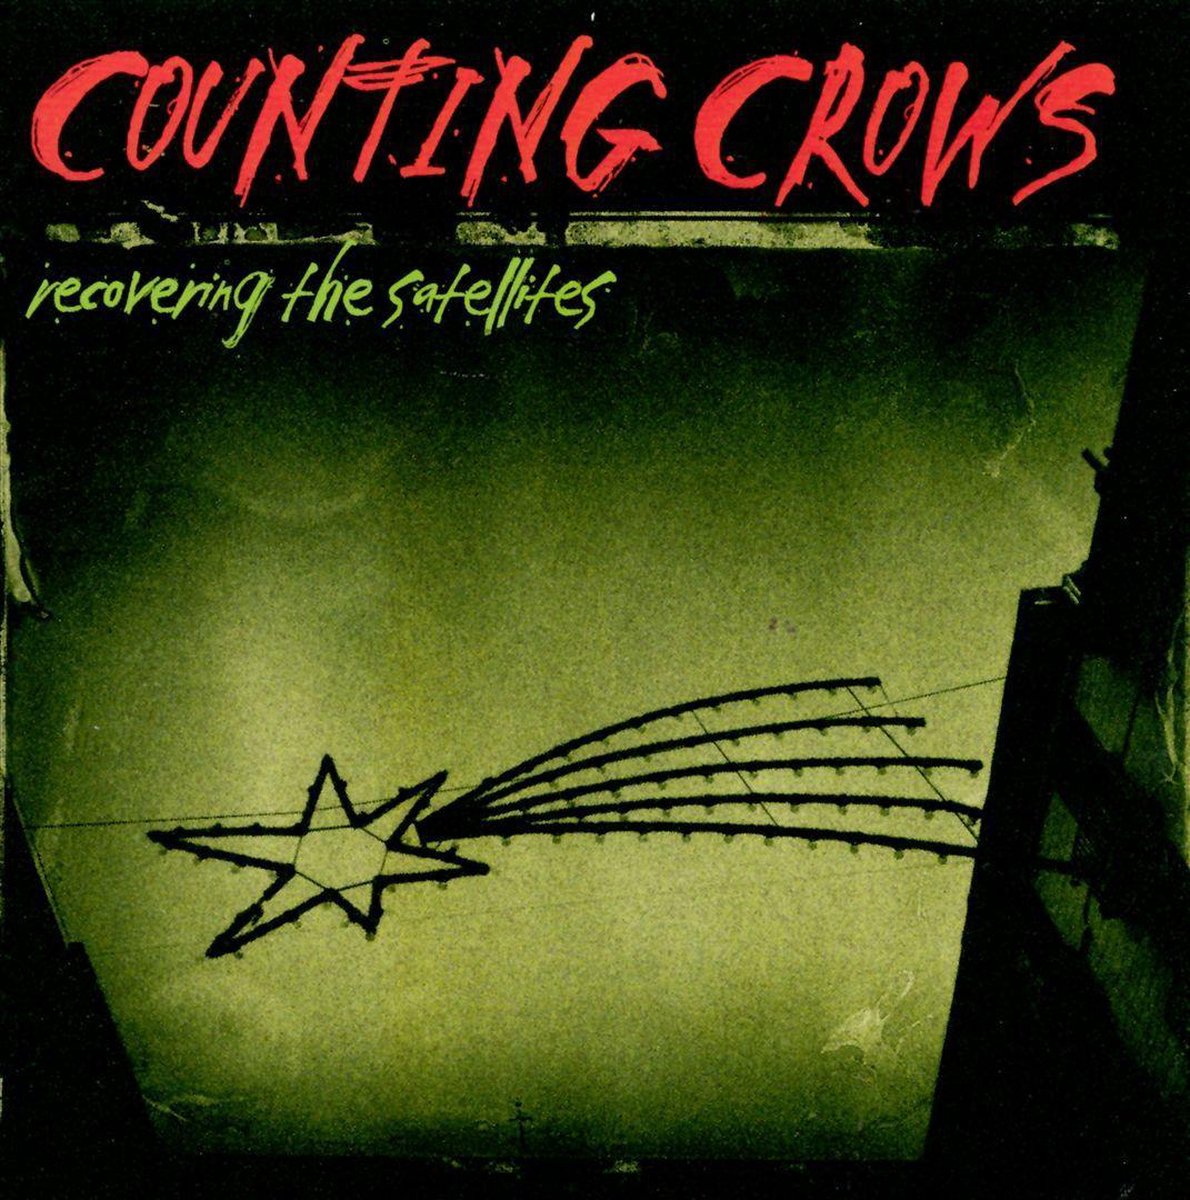 Recovering The Satellites - Counting Crows